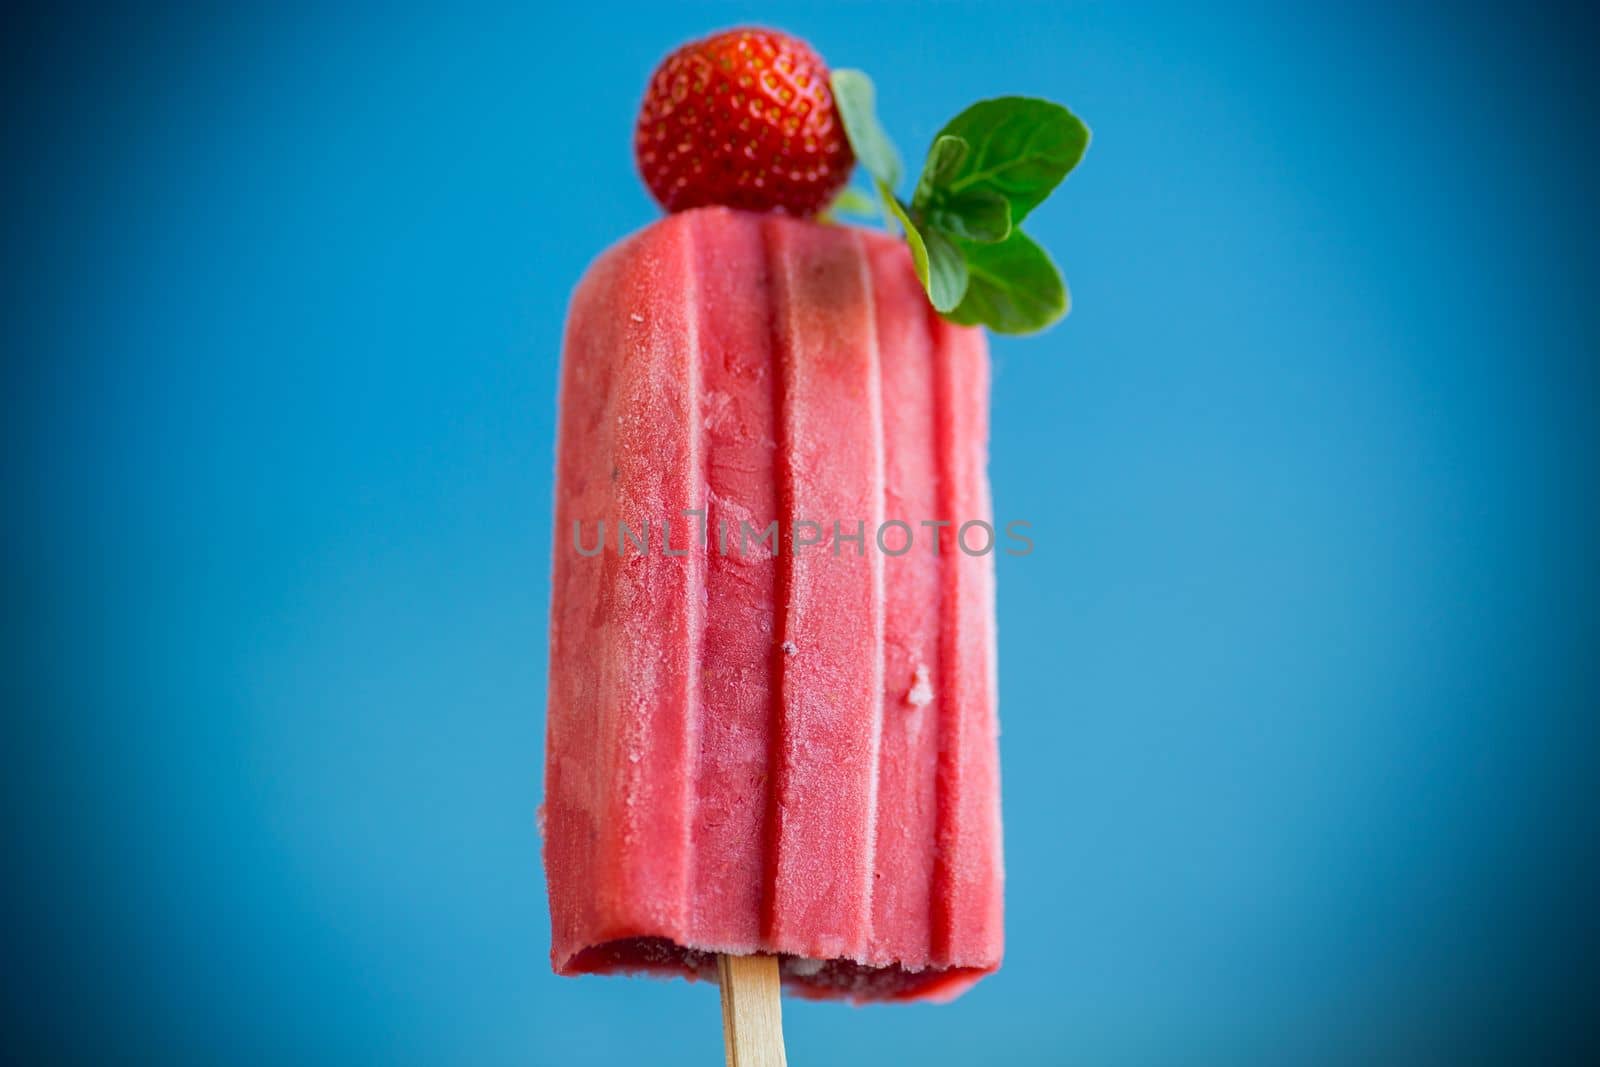 cooked homemade strawberry ice cream on a stick, isolated on blue background